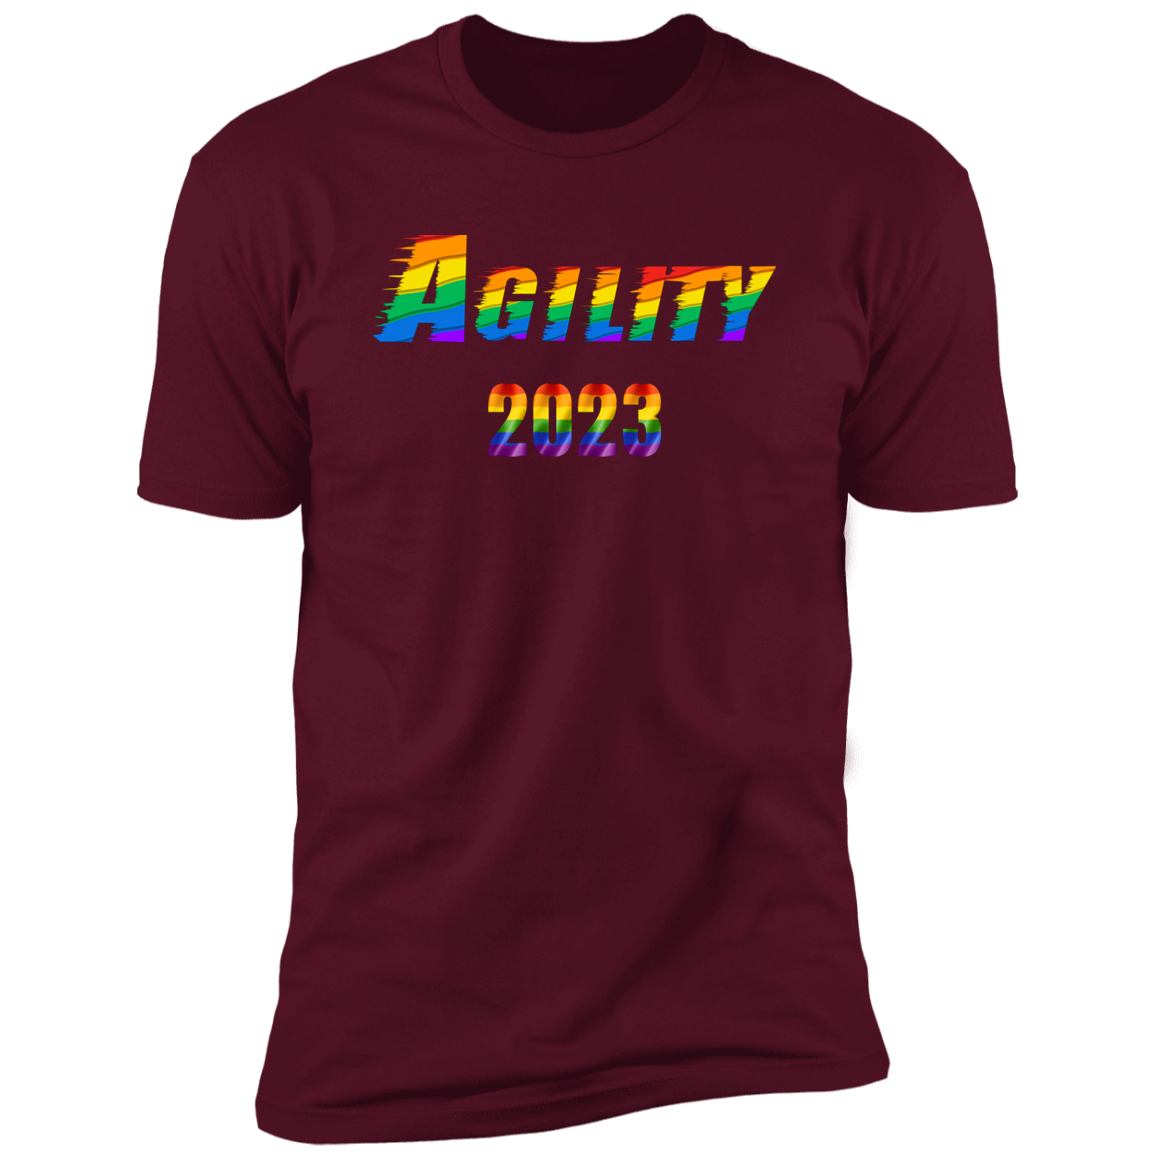 Agility Pride 2023 Cat pride t-shirt,  Agility pride shirt for humans, in maroon